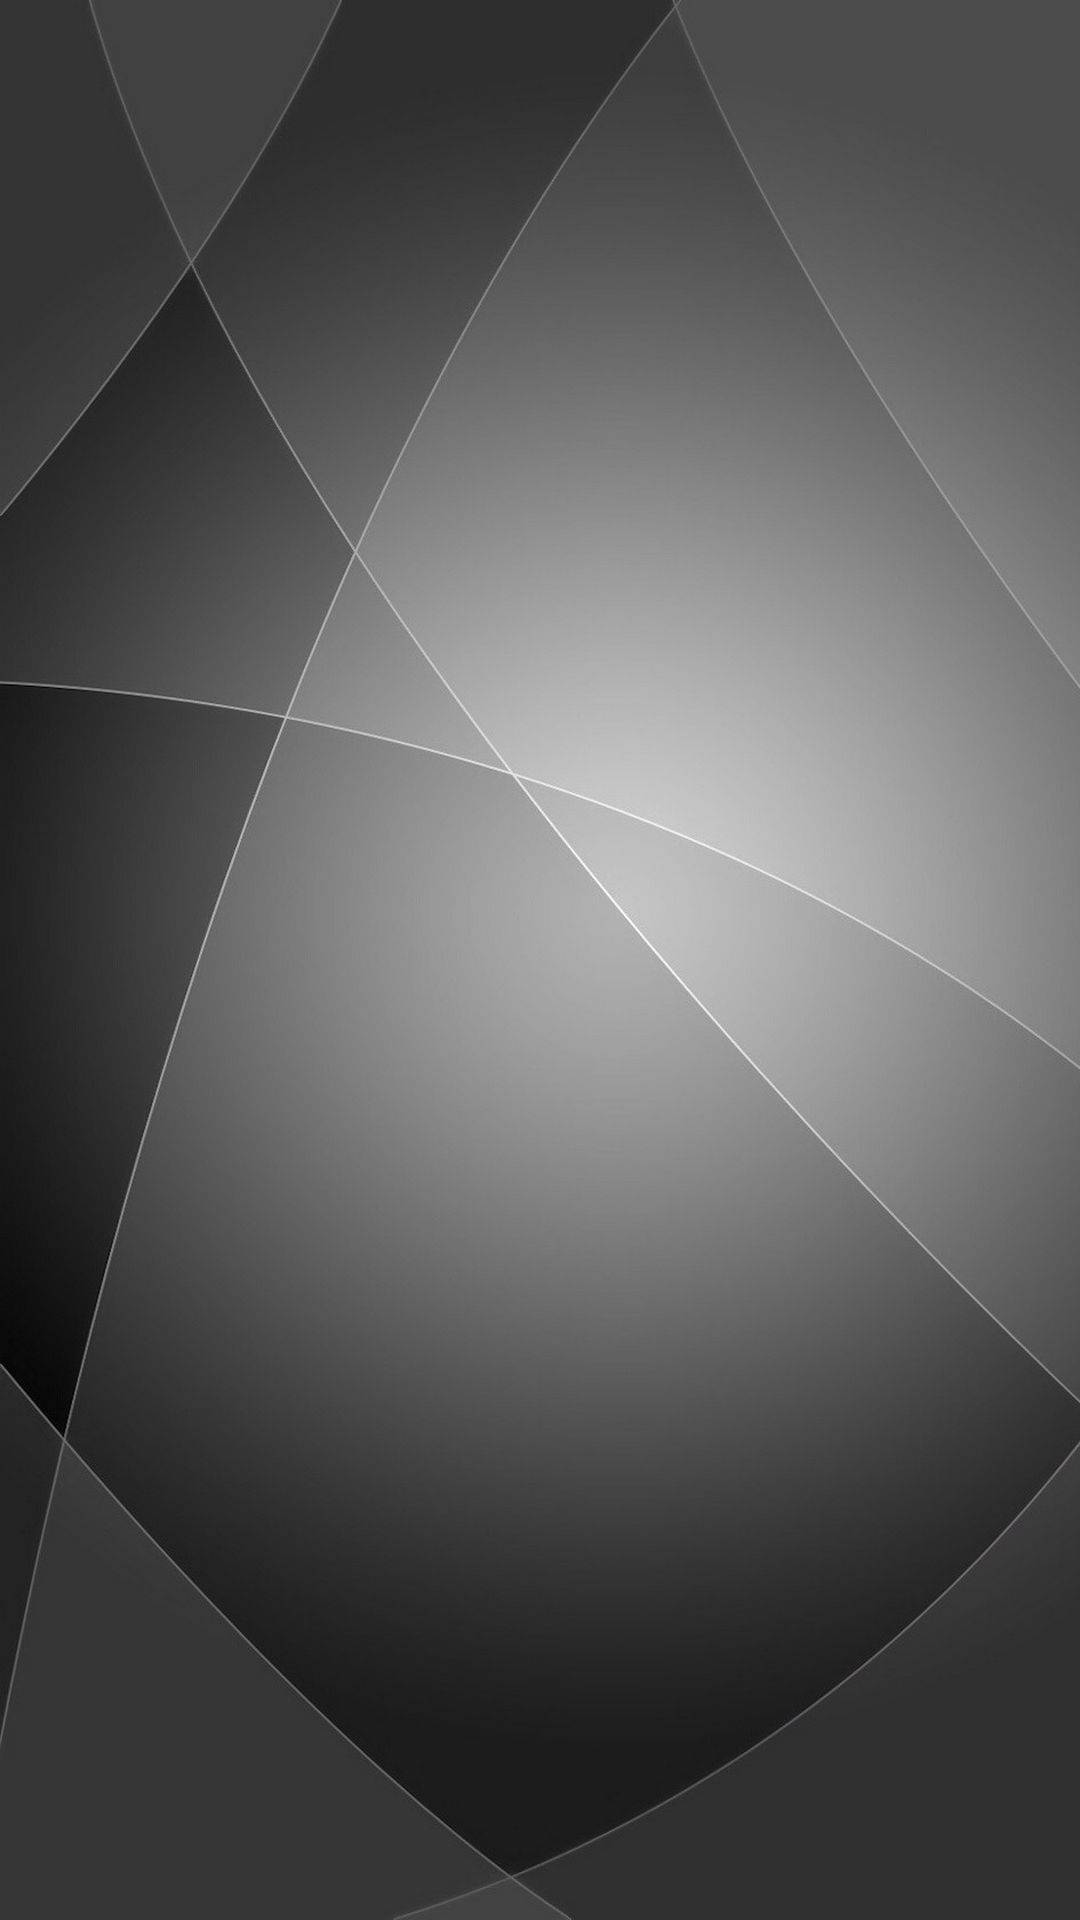 Free Grey Wallpaper Downloads, [400+] Grey Wallpapers for FREE | Wallpapers .com